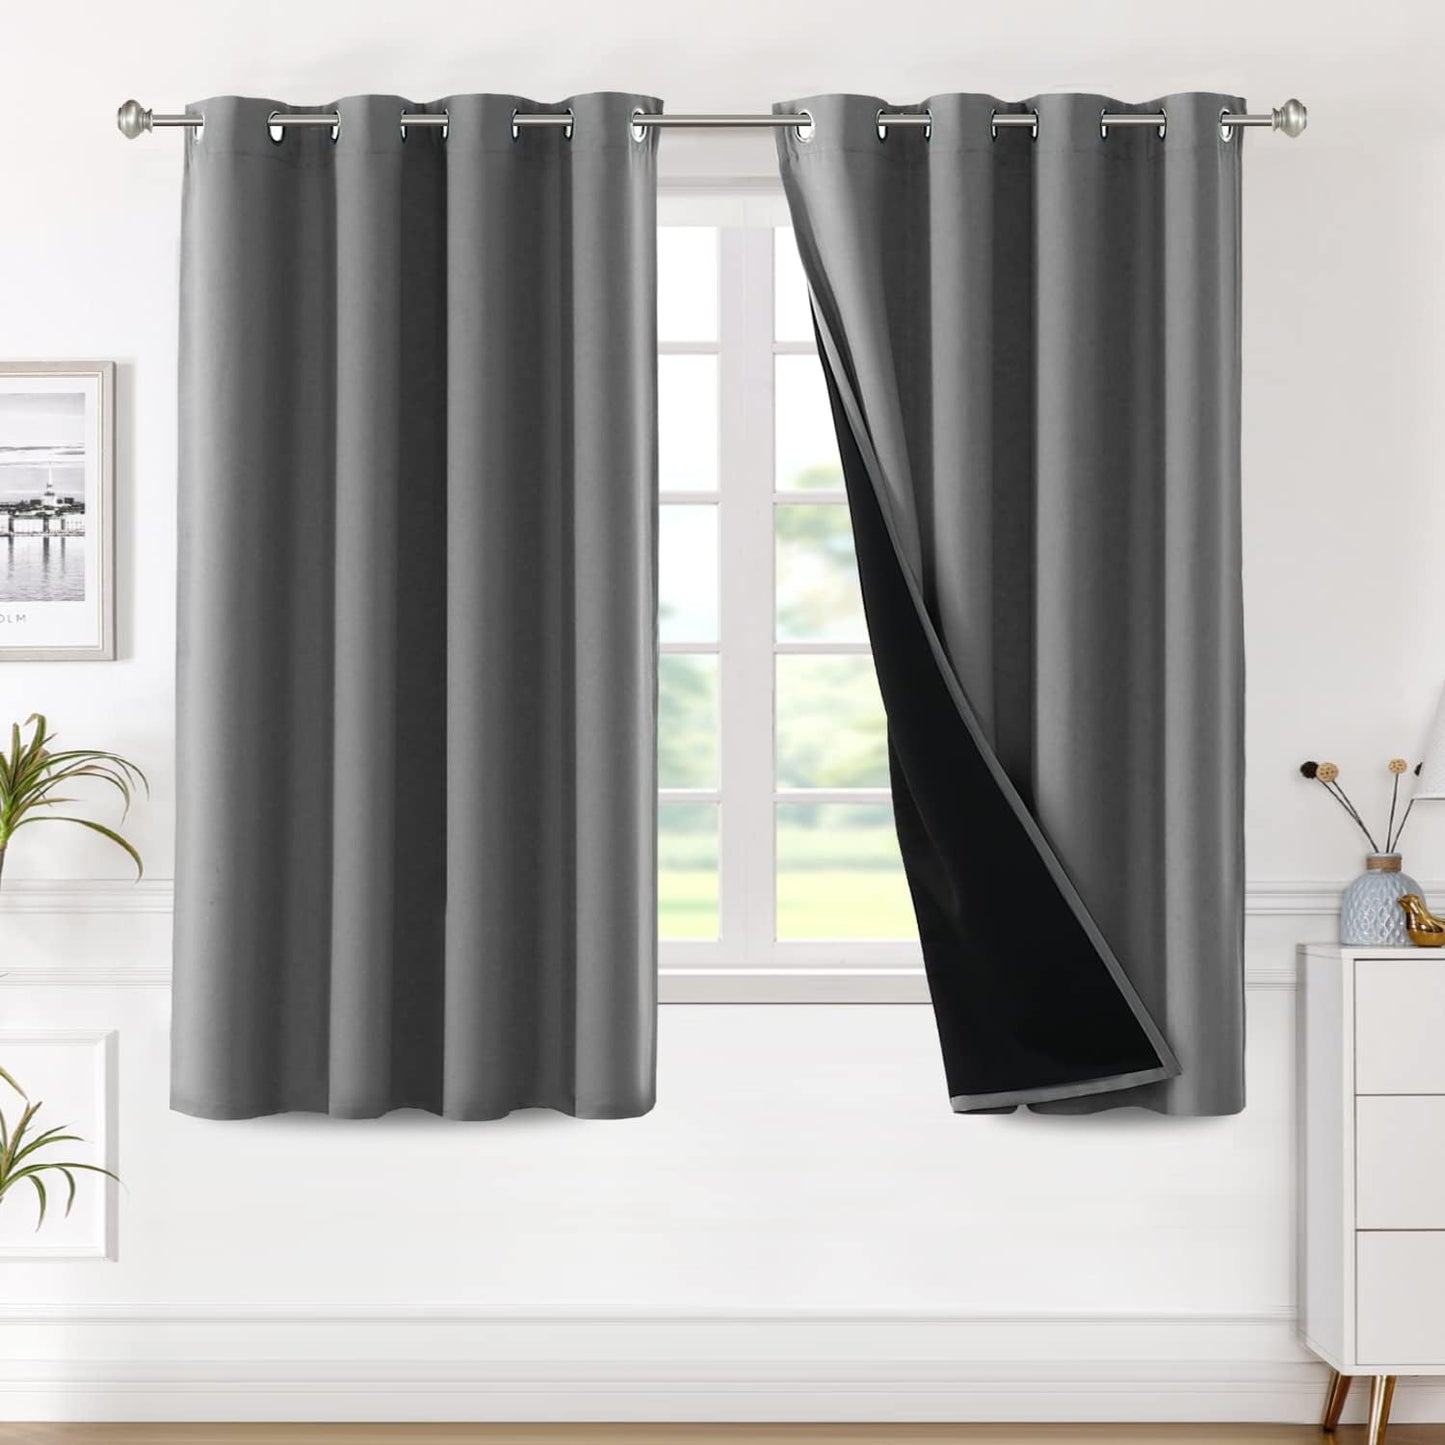 H.VERSAILTEX Blackout Curtains with Liner Backing, Thermal Insulated Curtains for Living Room, Noise Reducing Drapes, White, 52 Inches Wide X 96 Inches Long per Panel, Set of 2 Panels  H.VERSAILTEX Charcoal Gray 52"W X 63"L 